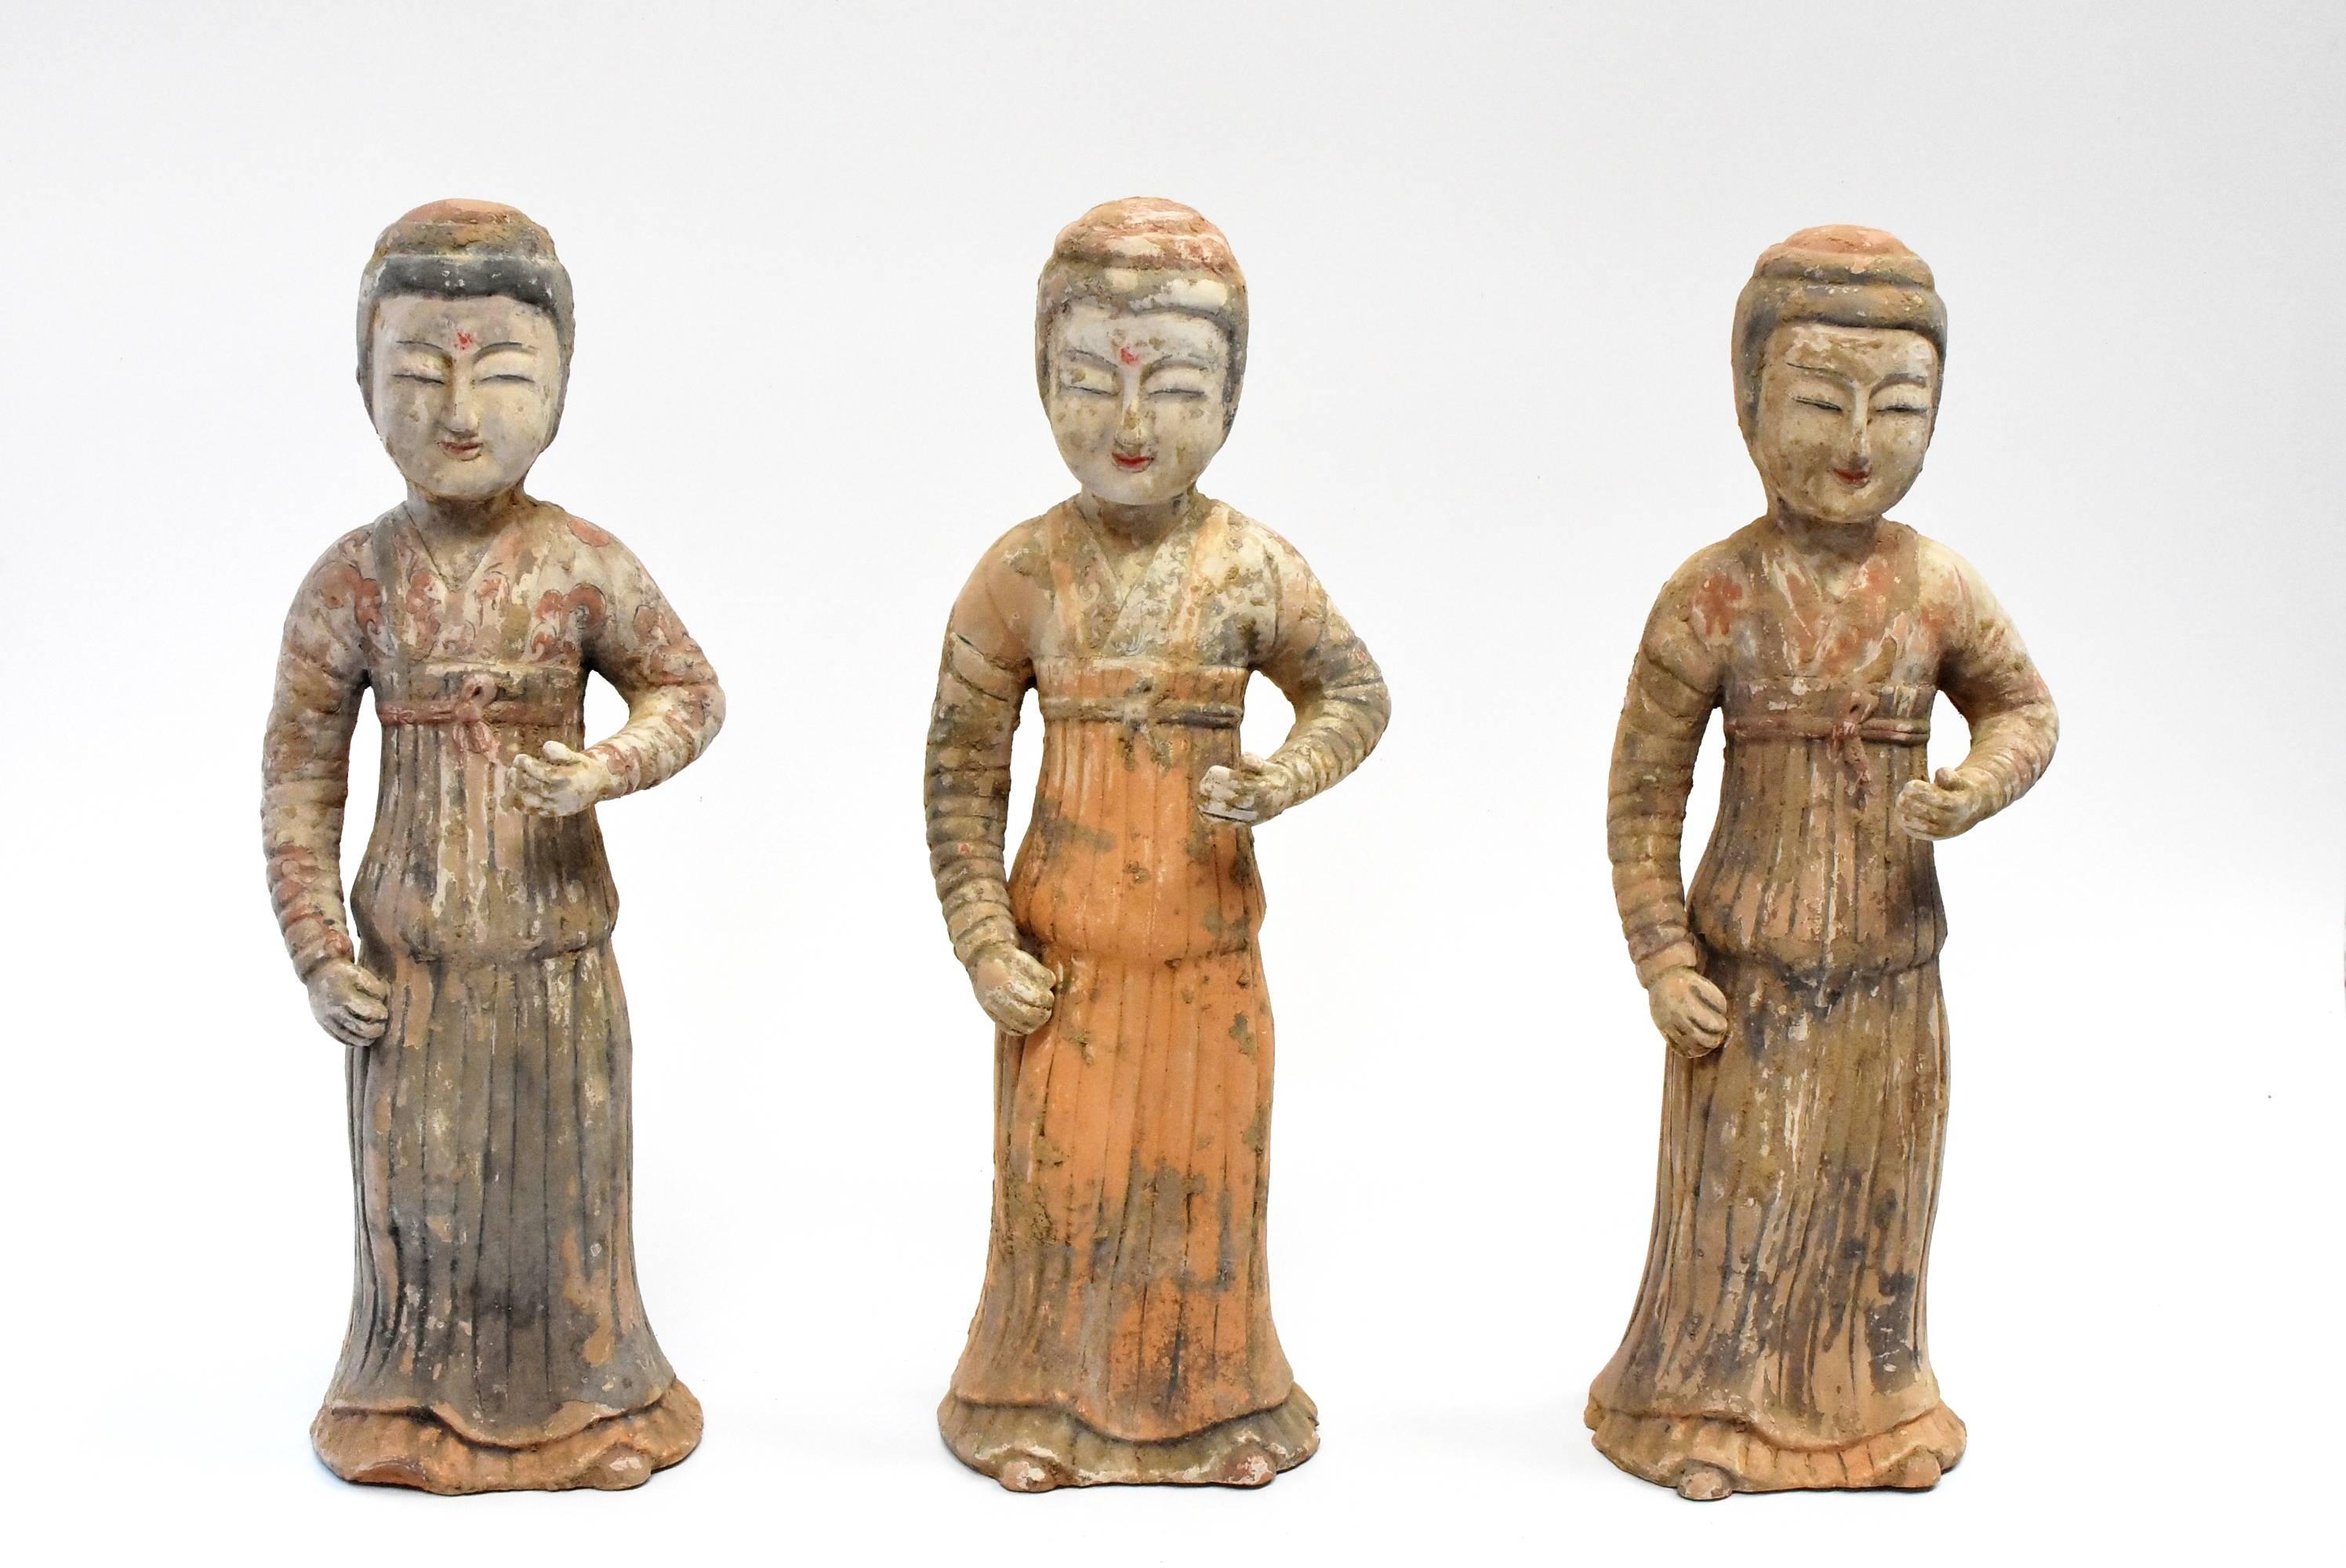 A set of beautiful terracotta court ladies in the Han dynasty style. Featured are governesses whose jobs are to train the ladies of the house all manners and etiquette, as well as the maids and servants proper ways of service. They are dressed in